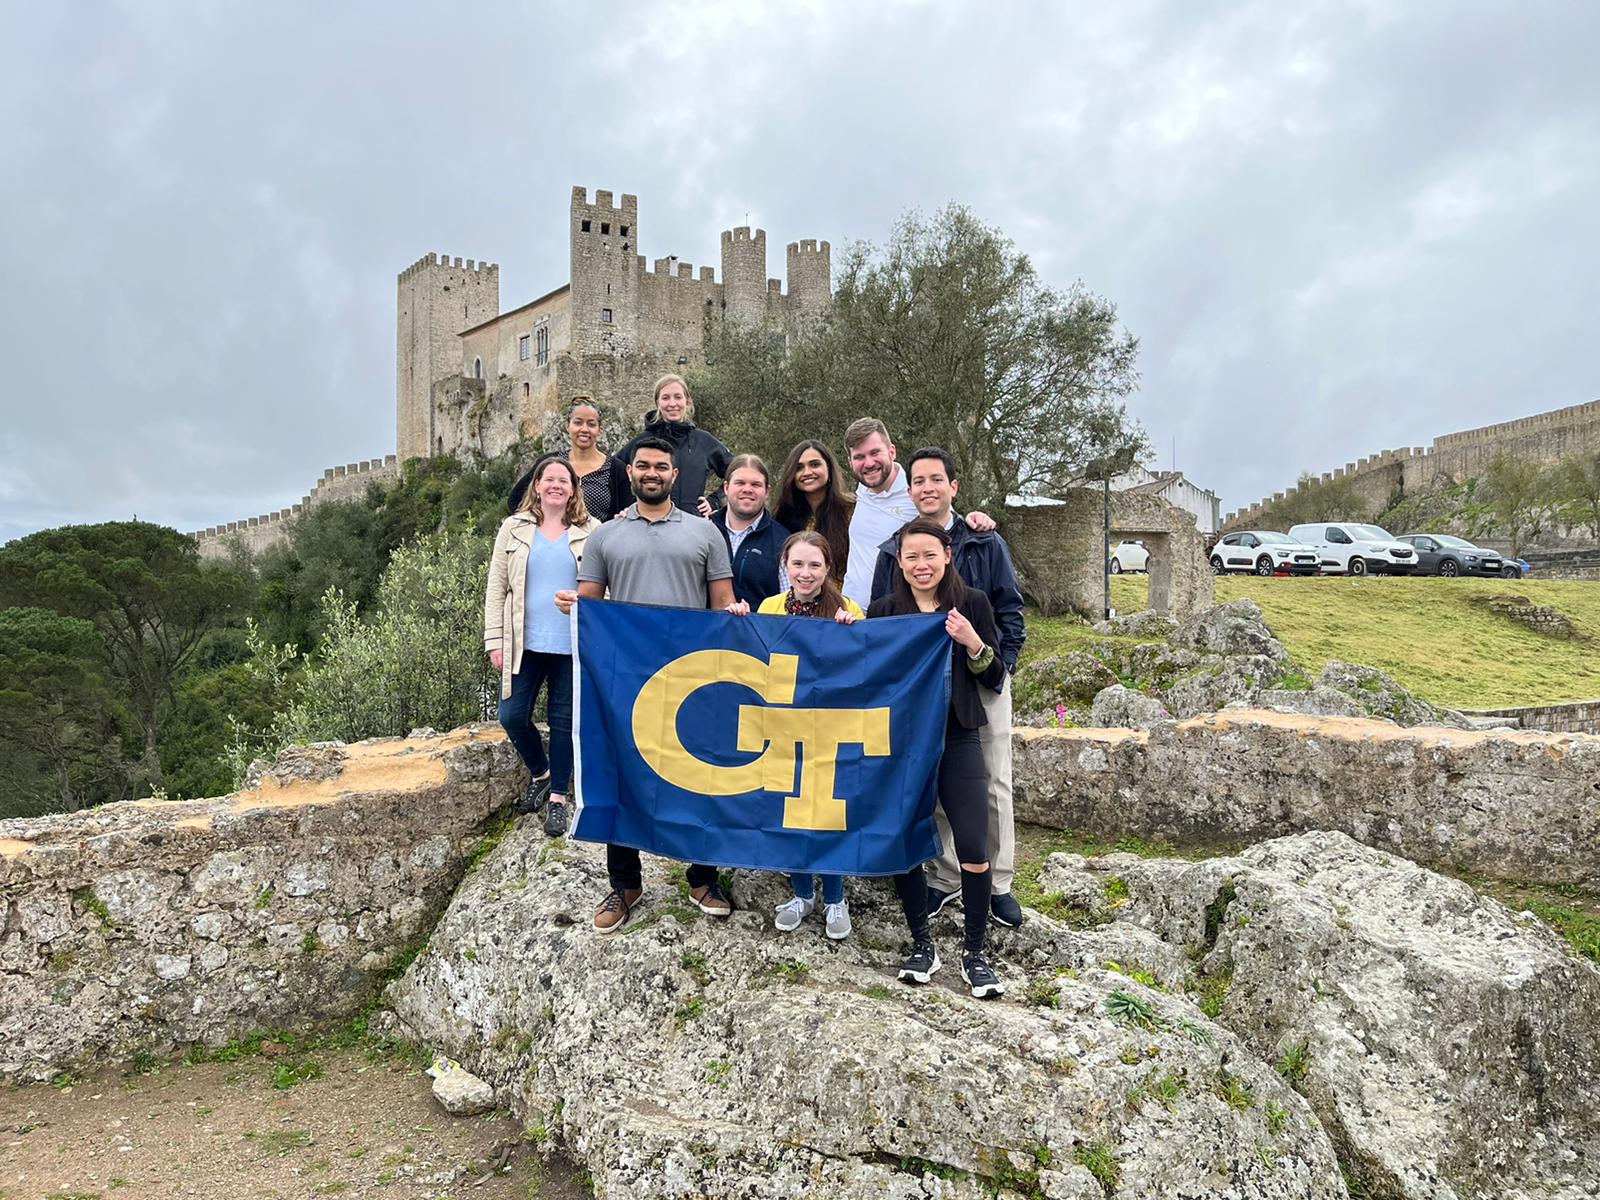 Students hold a GT Flag in front of a castle